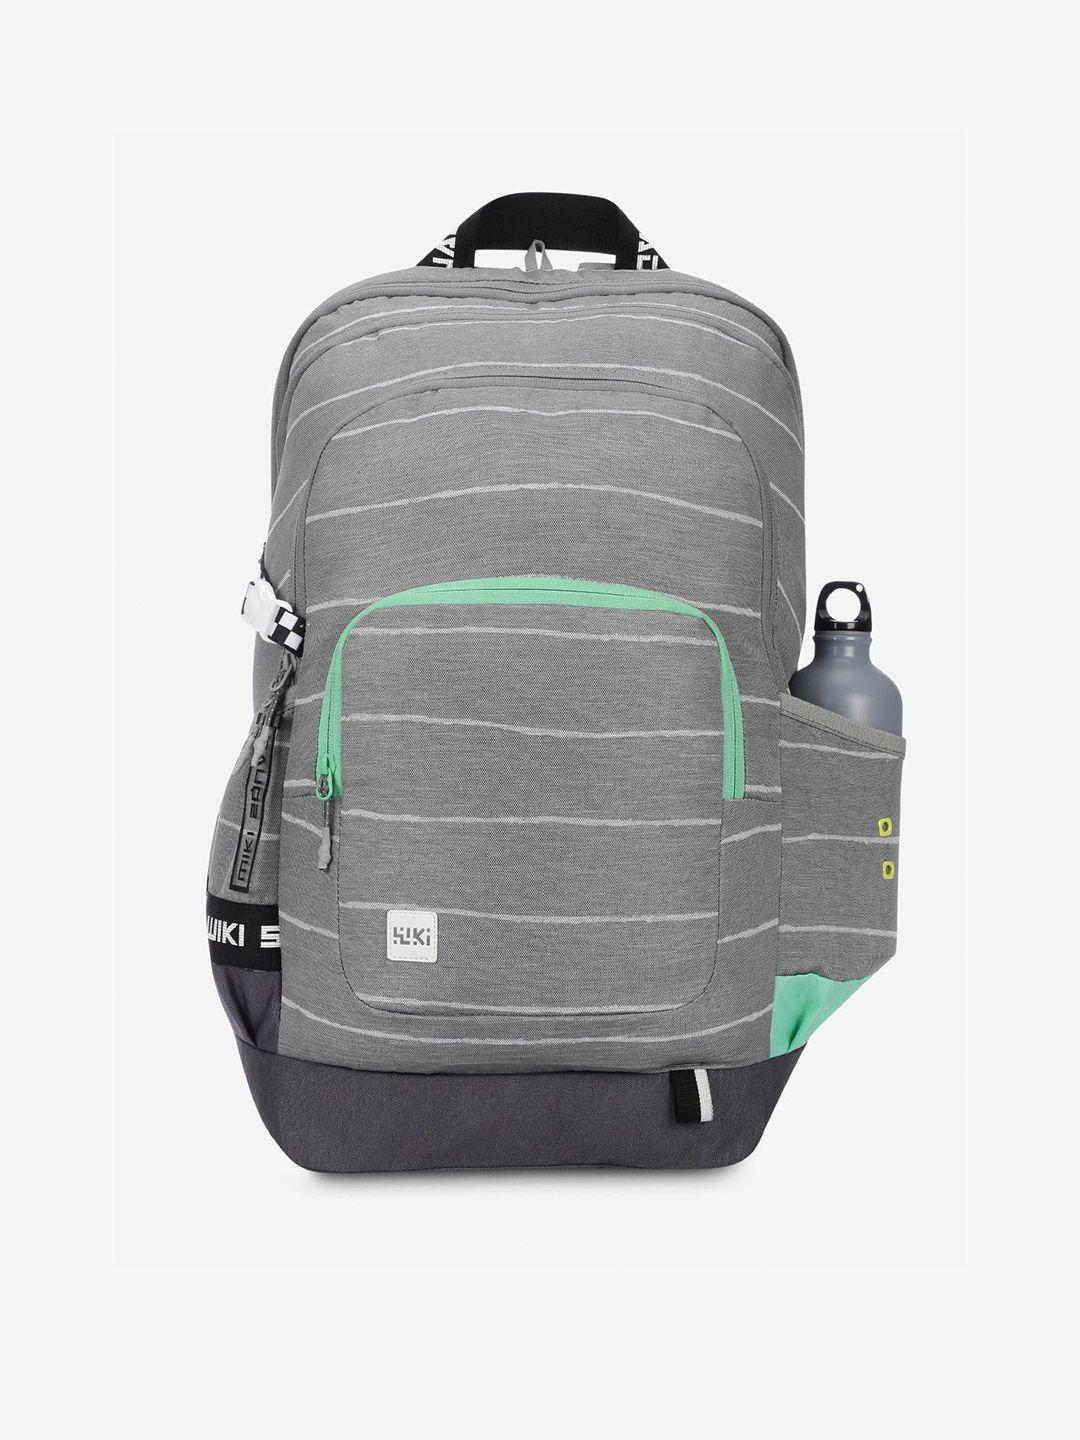 wildcraft striped squad 4 pro backpack